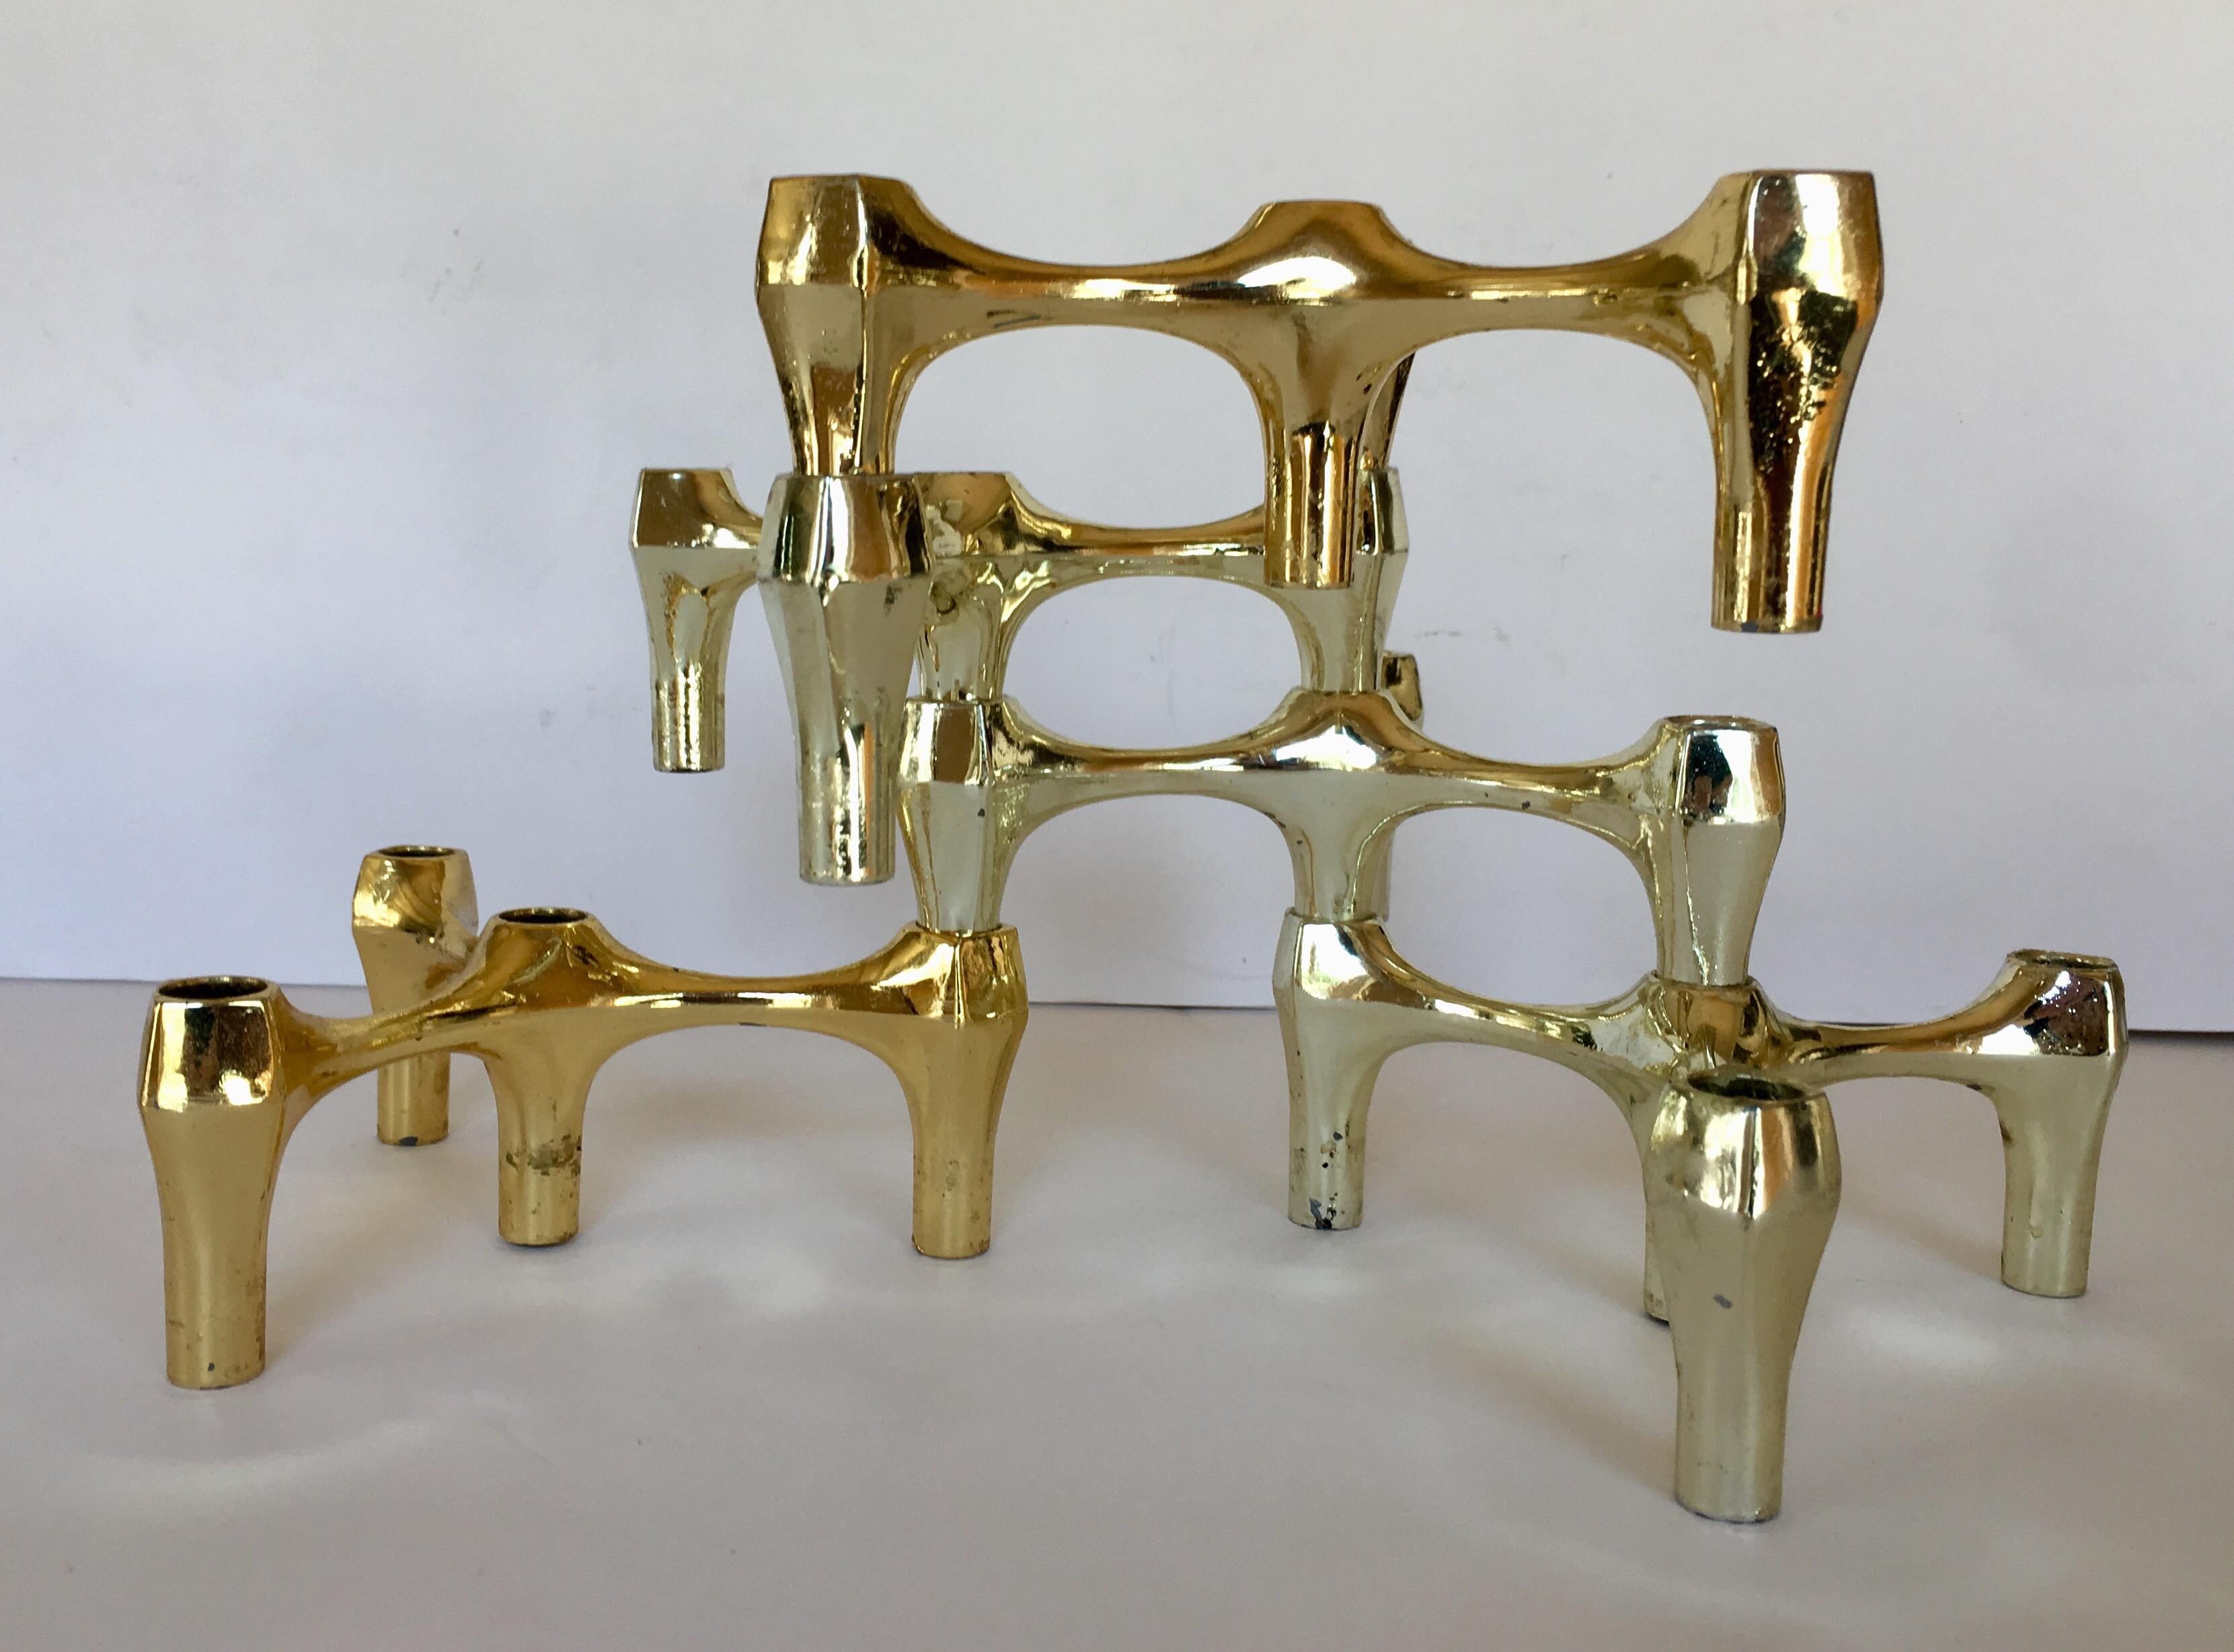 Lacquered Mid-Century Modern Sculptural Nagel Style Modular Candlestick Holders